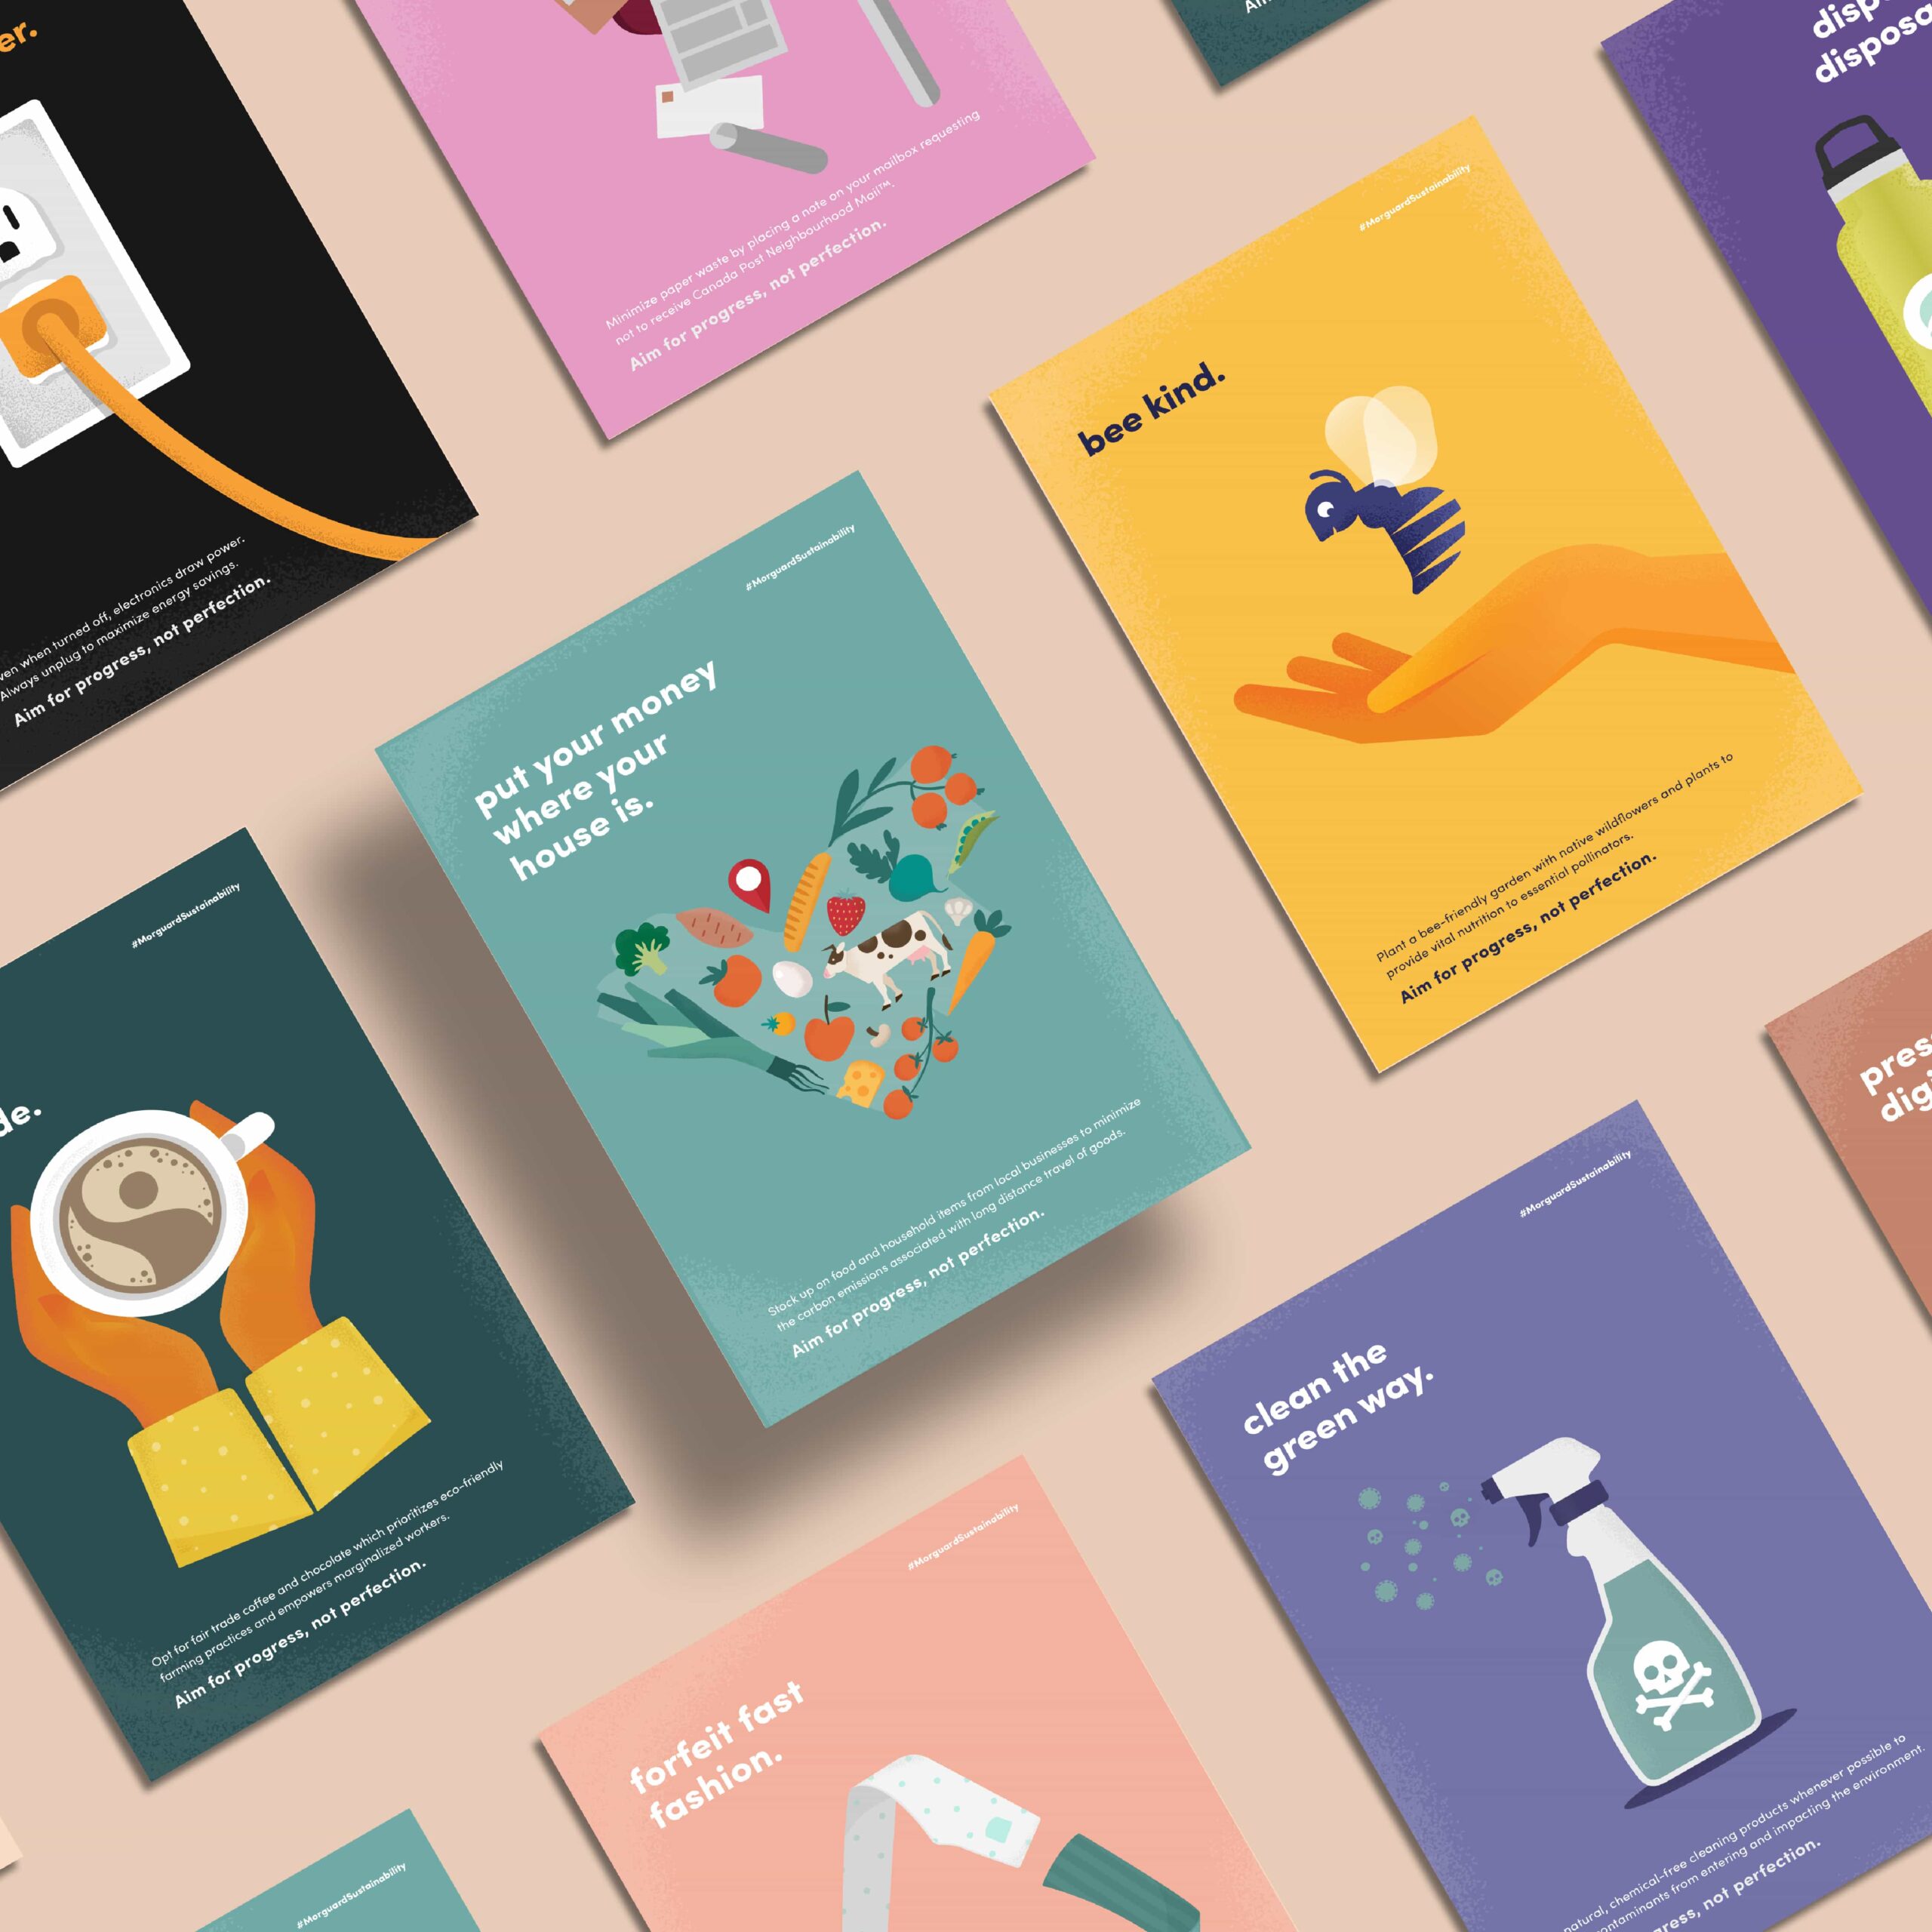 Brightly coloured posters, featuring simplistic illustrations